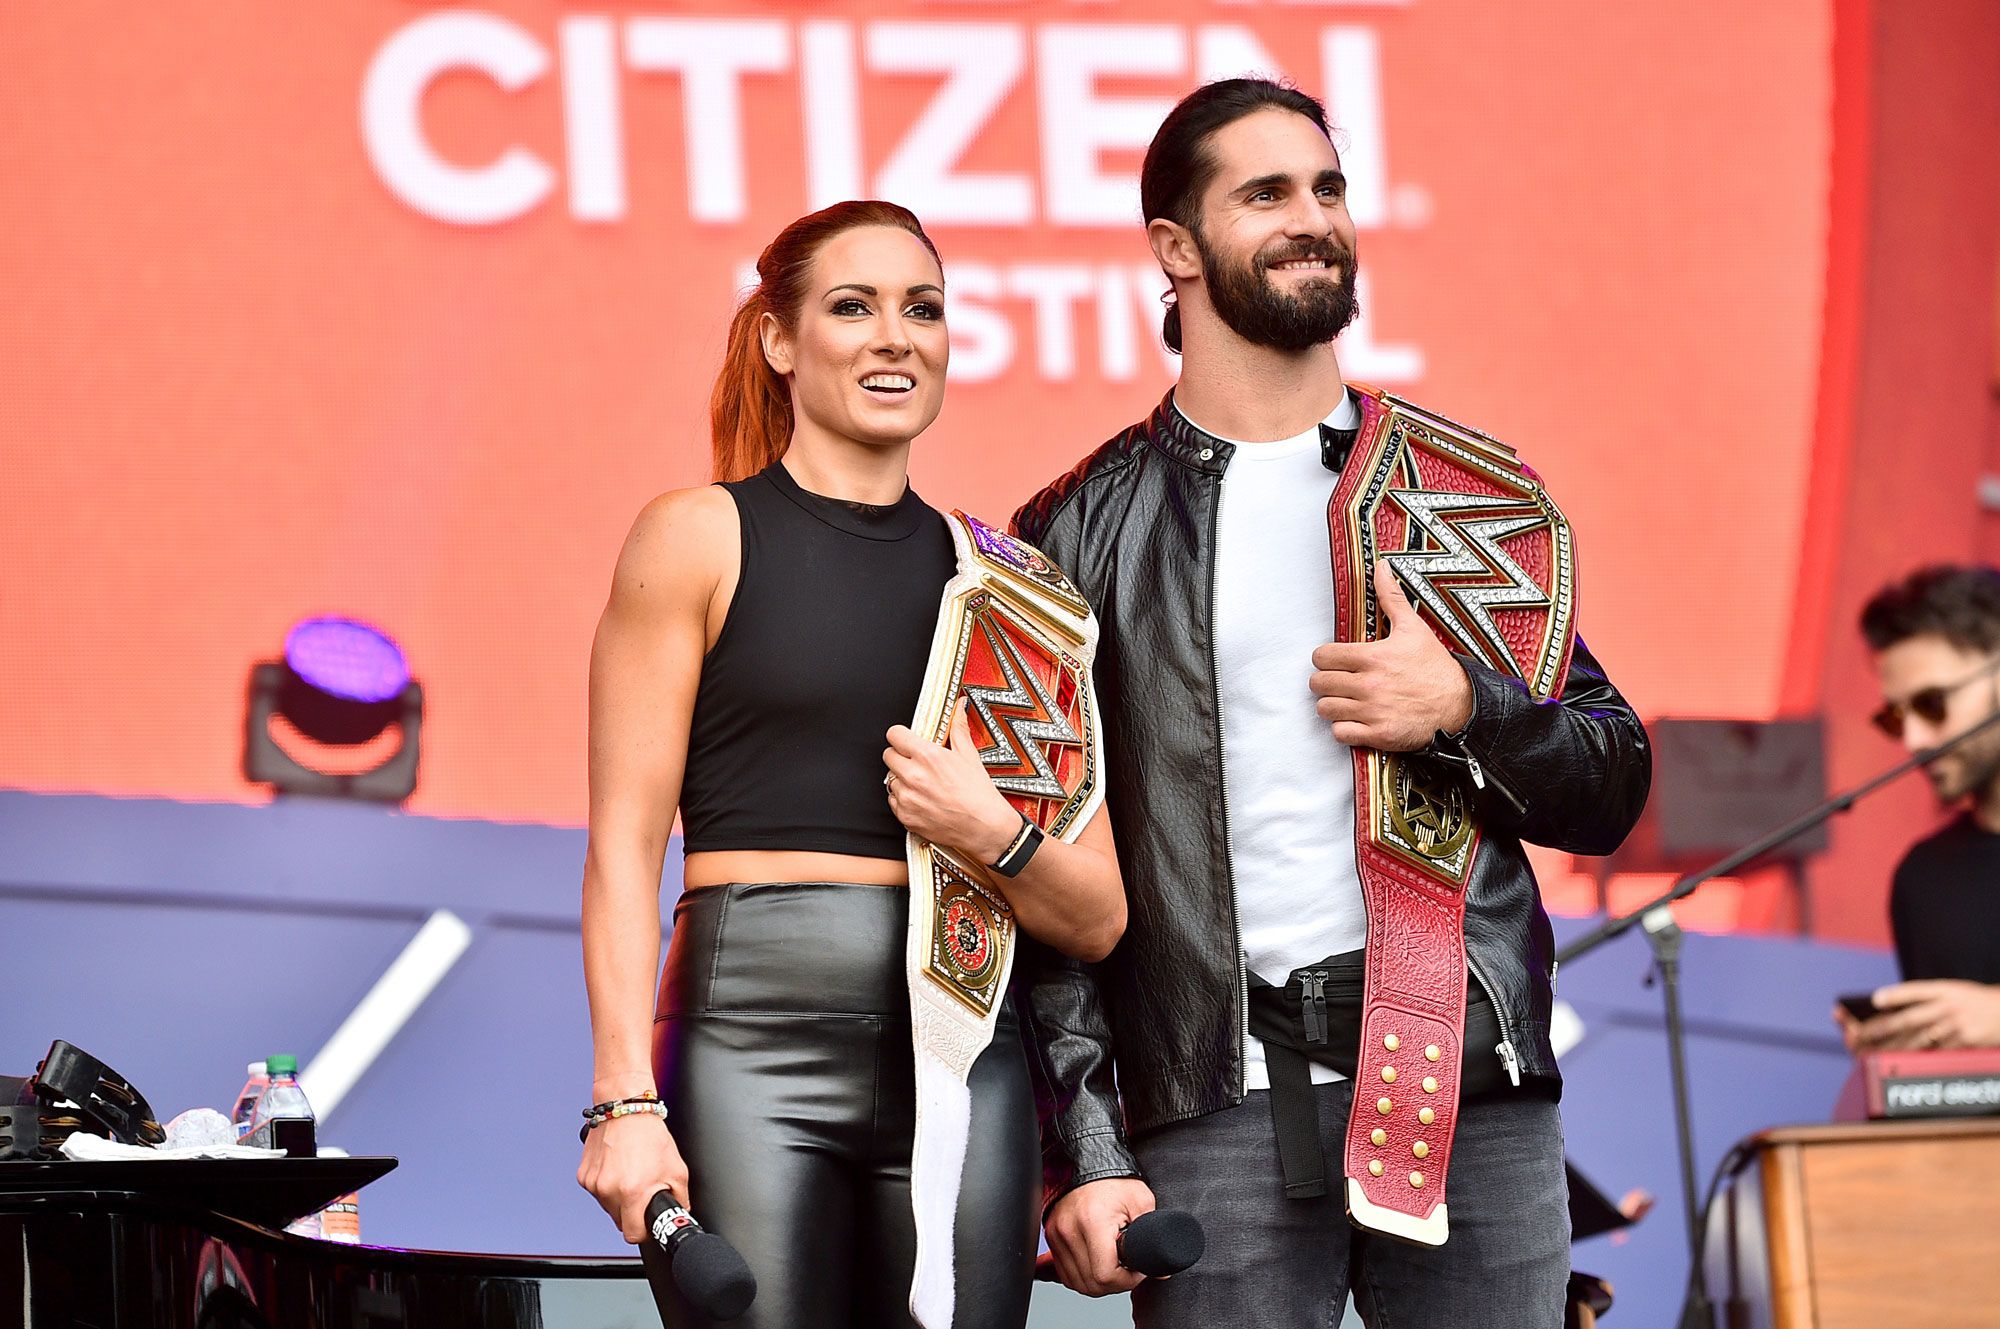 WWE Comments on Seth Rollins & Becky Lynch's Engagement